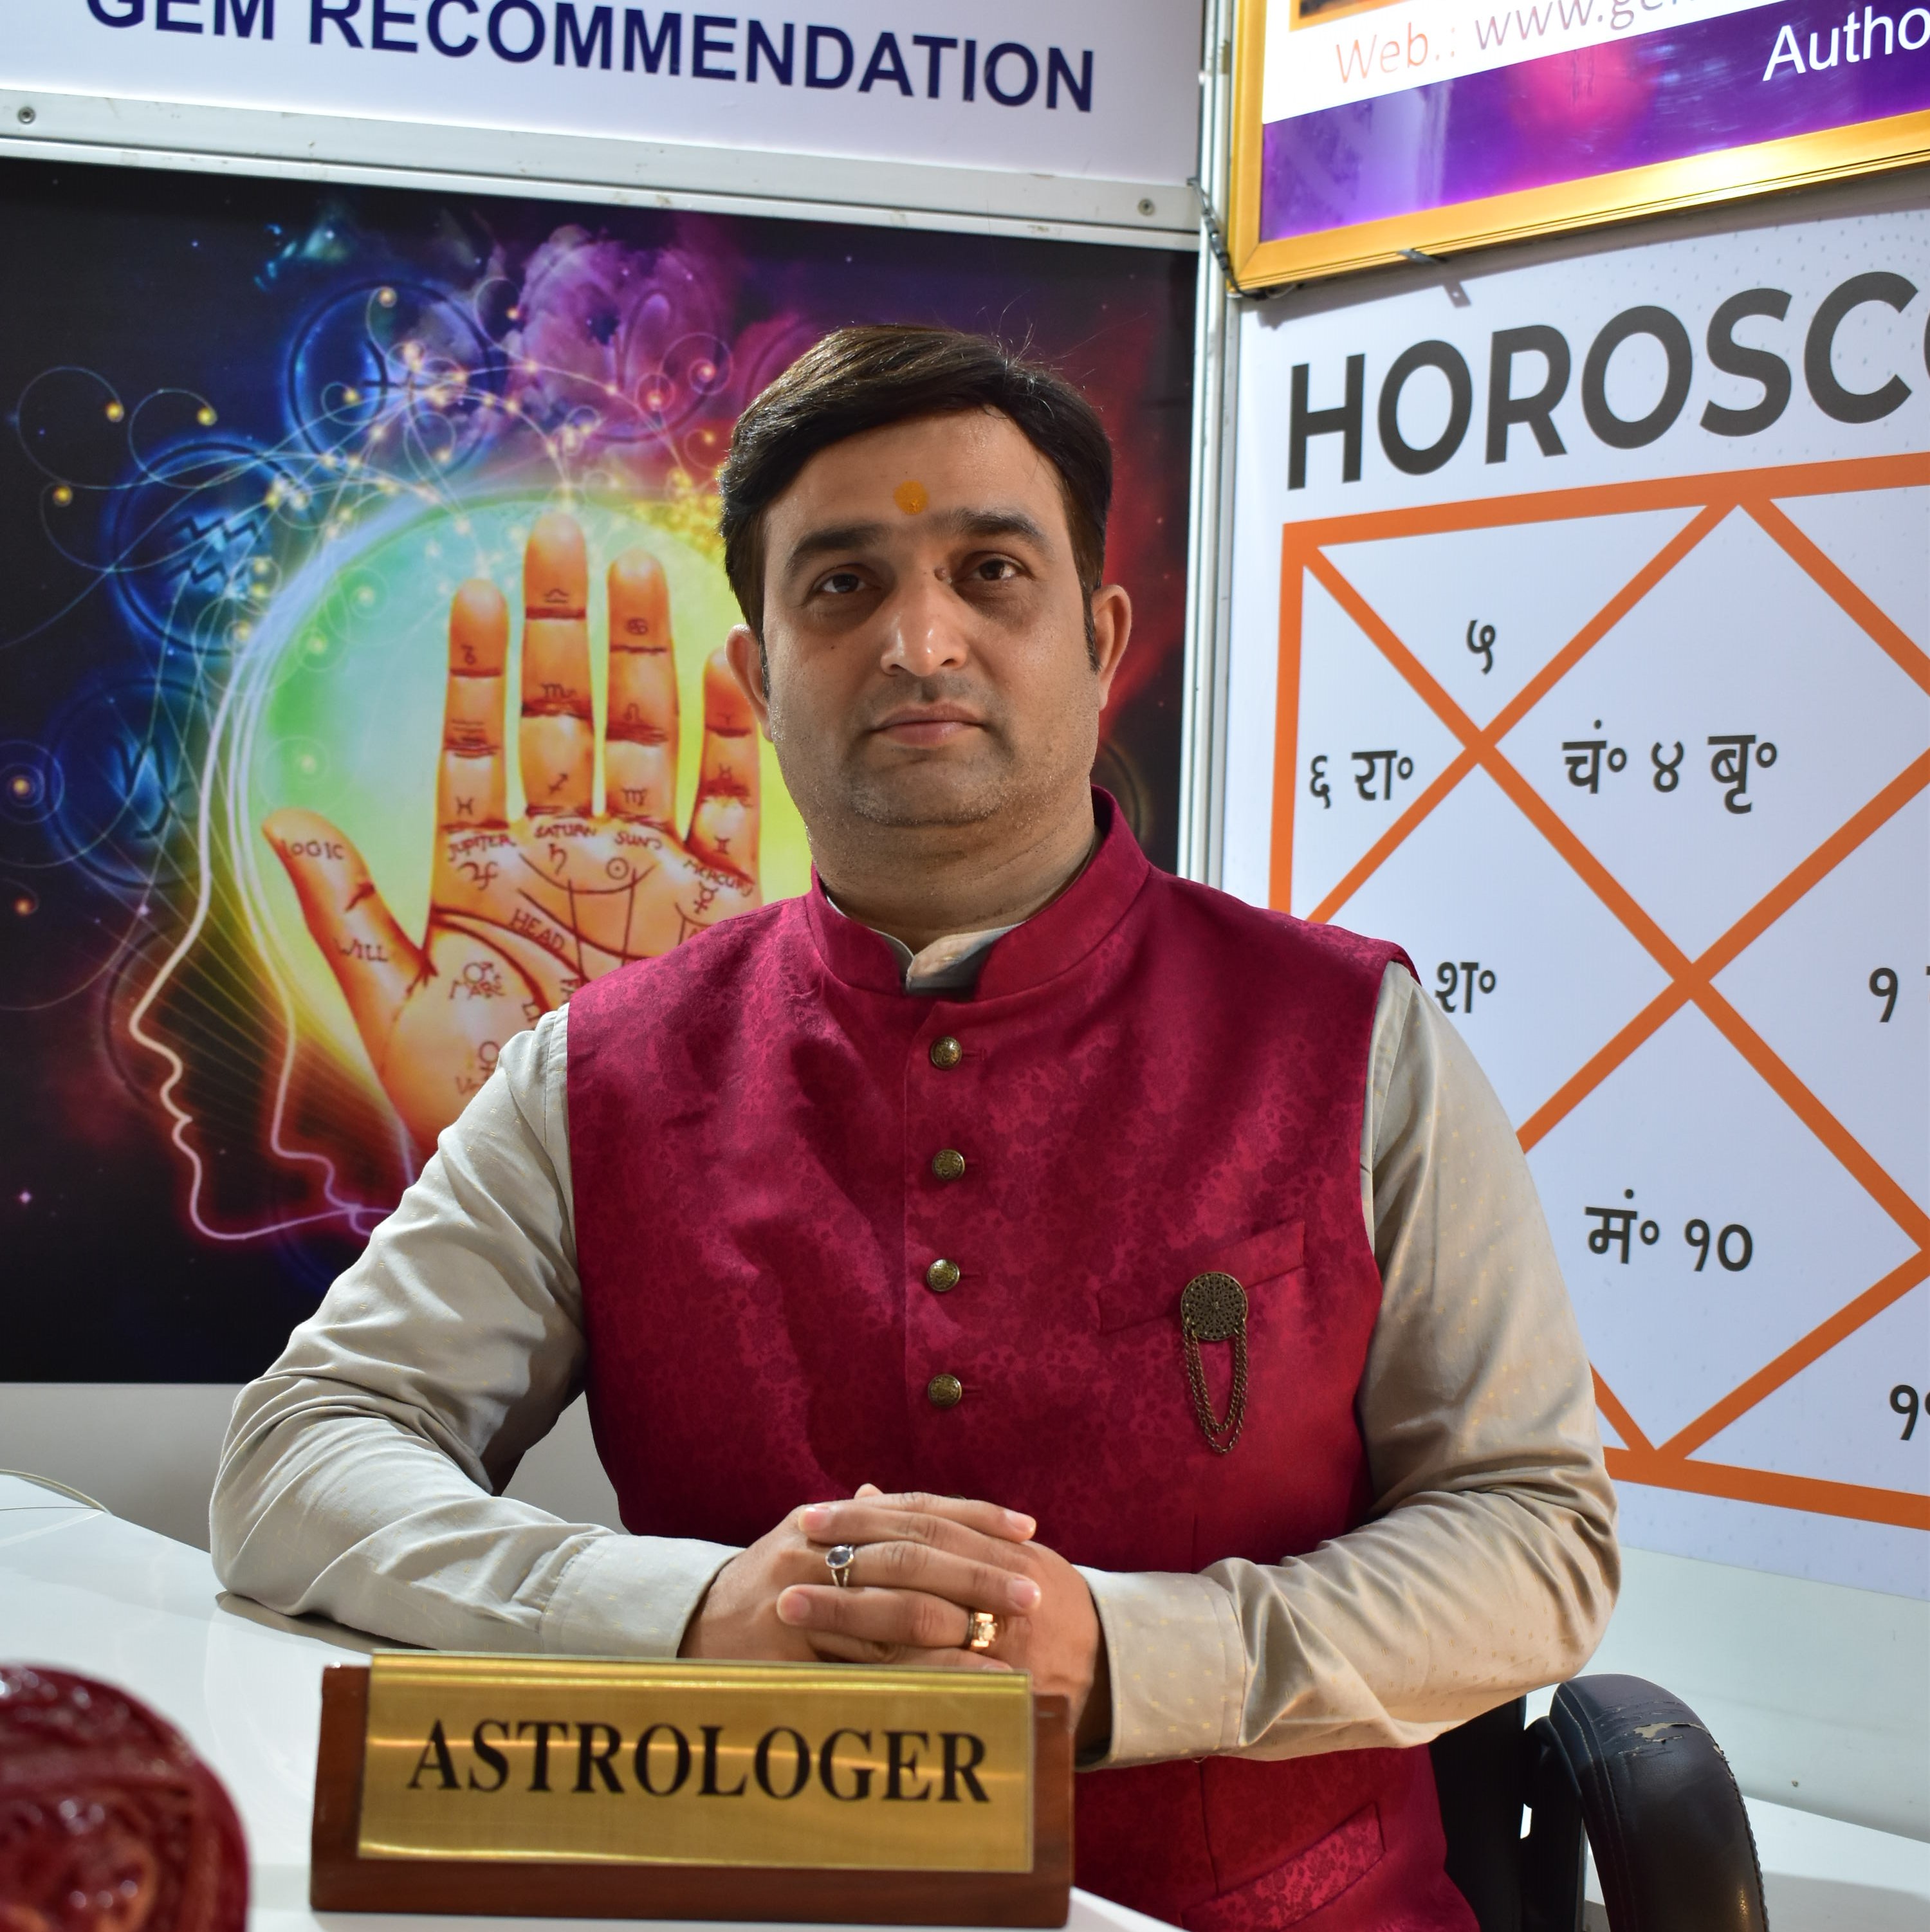 Astrologer's Picture